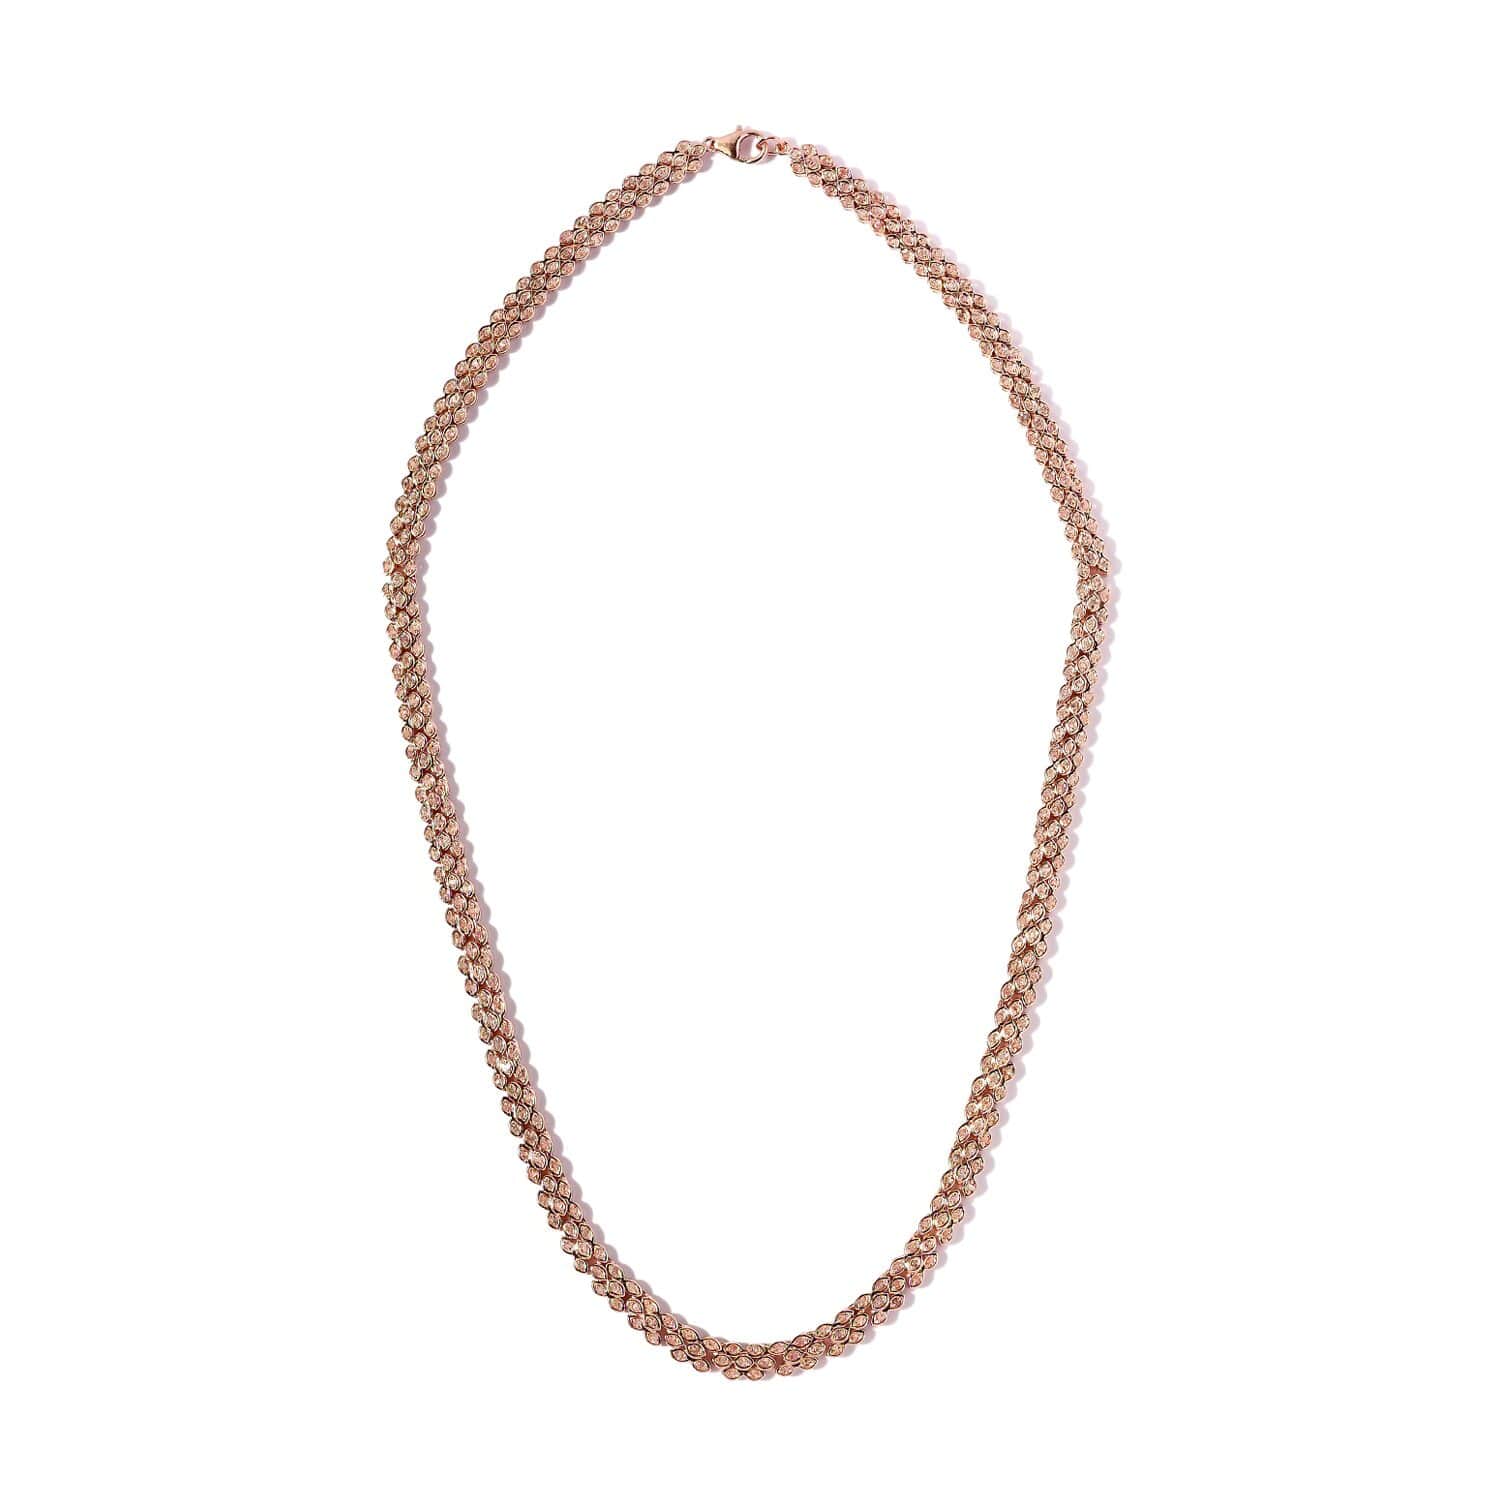 Buy Uncut Natural Pink Diamond Necklace 20 Inches in Vermeil Rose 